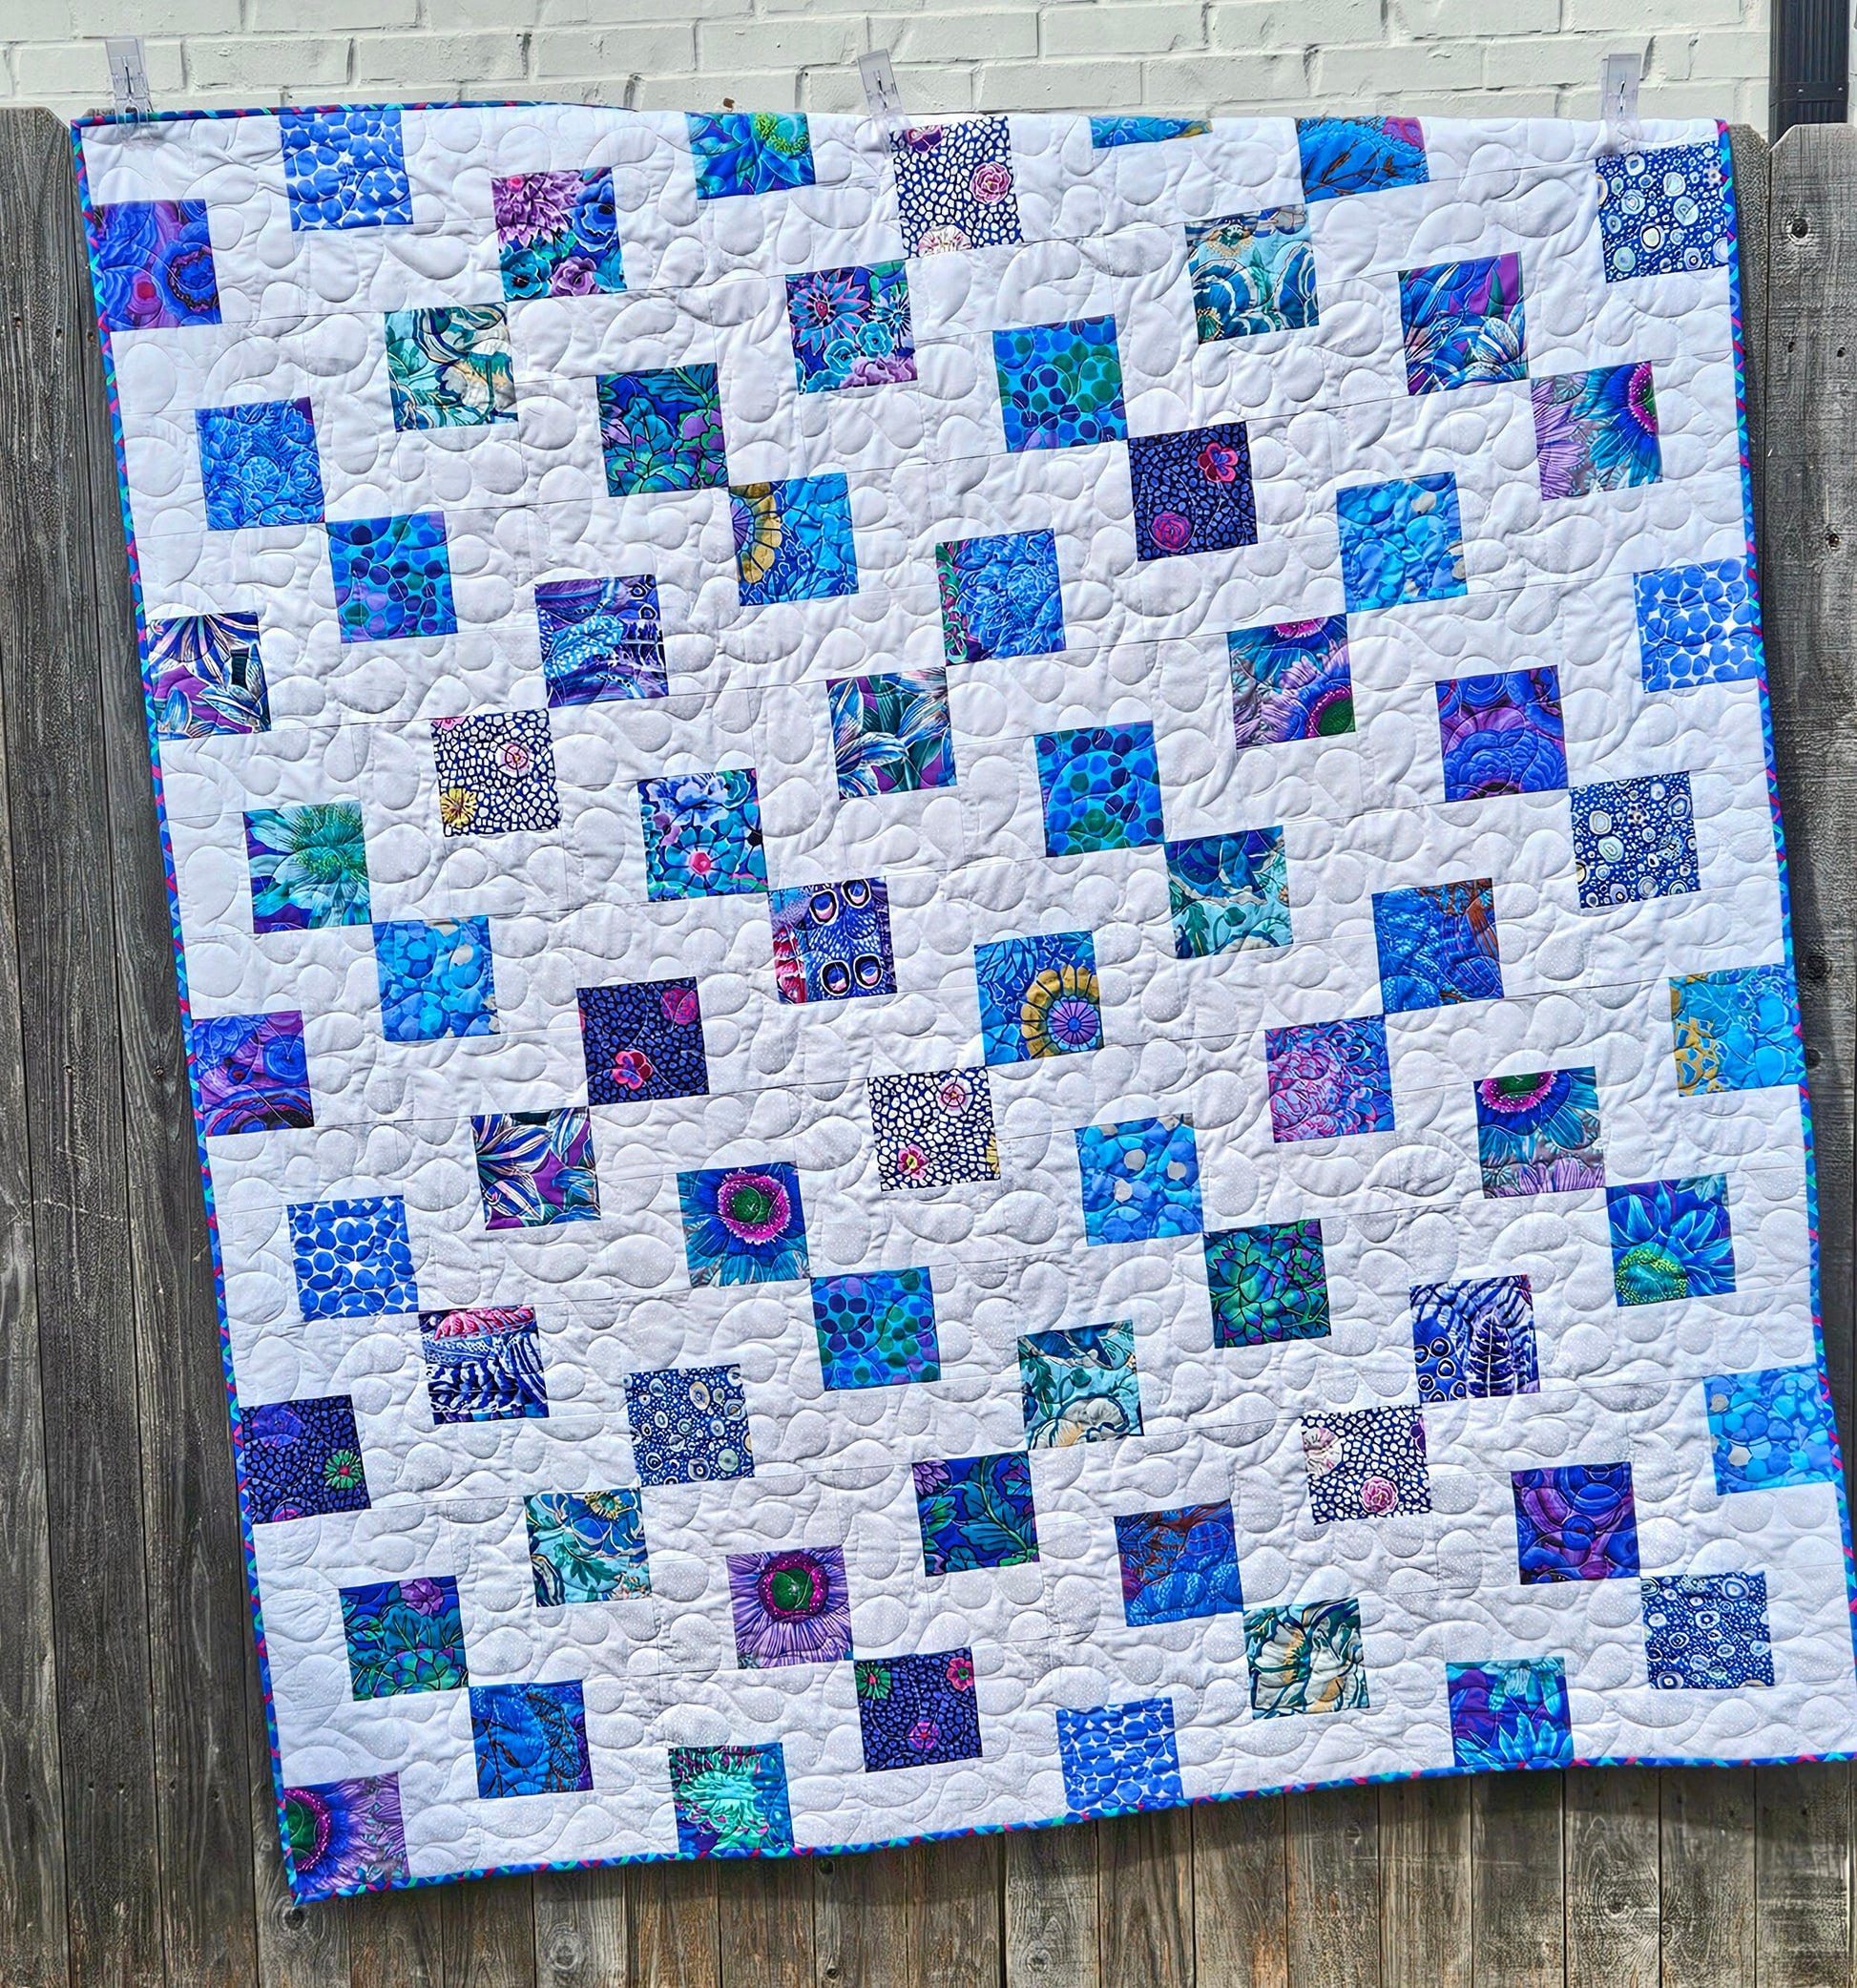 Double the Charm quilt pattern with sample quilt done in blue Kaffe Fassett charm squares on a white background. Quilt is shown hanging on a fence.